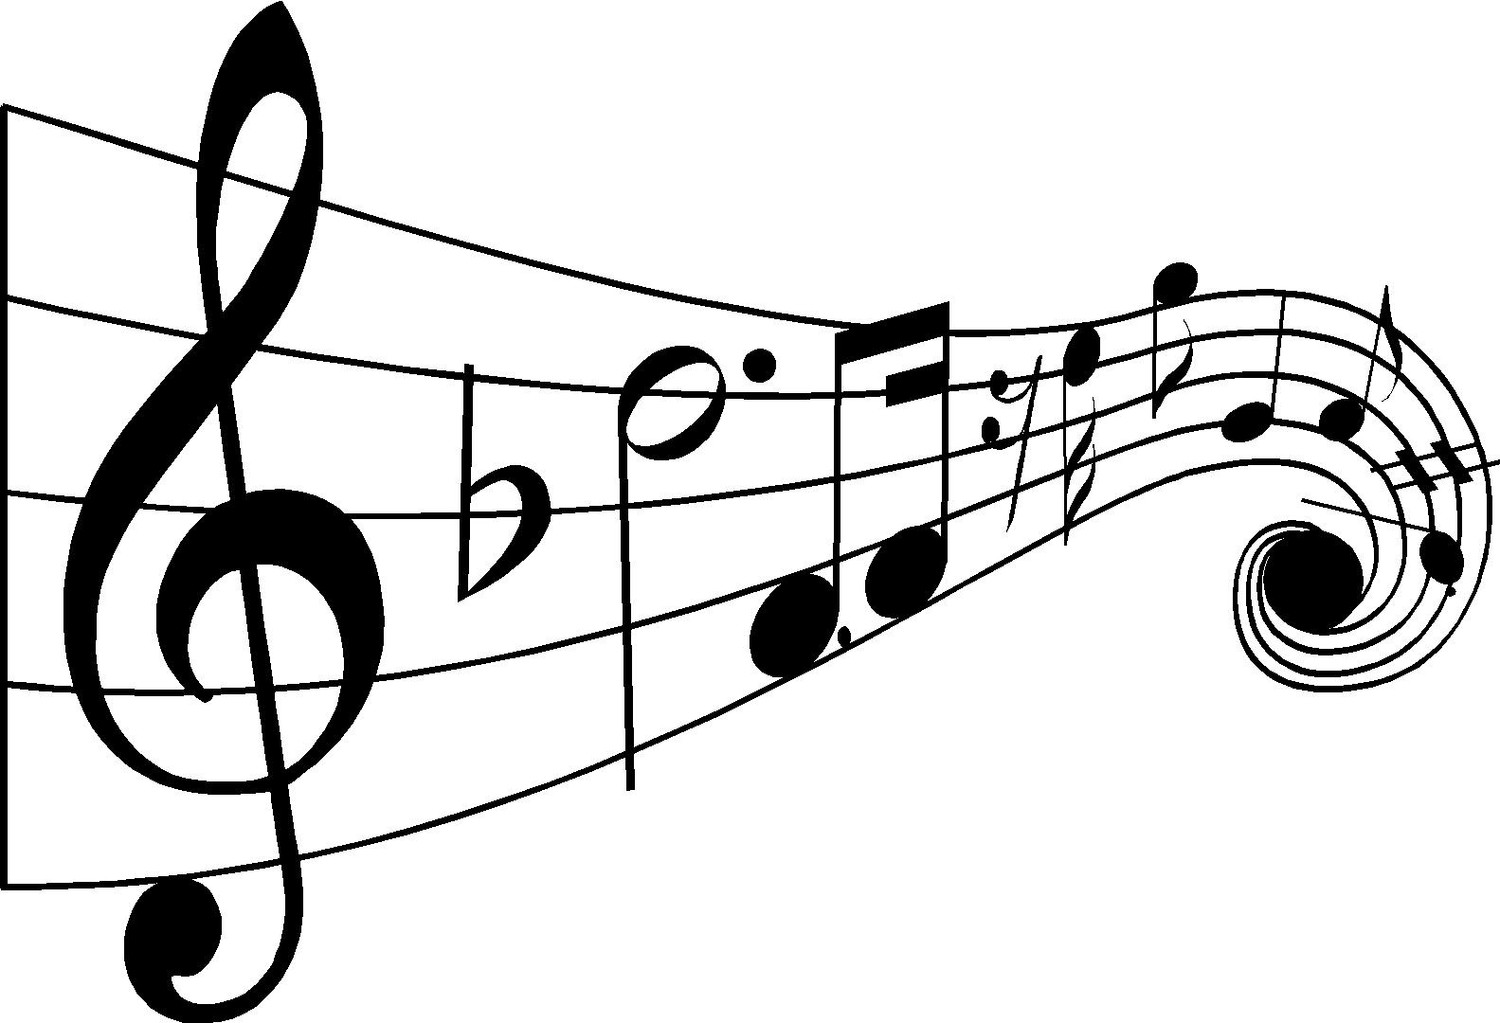 Clipart Of Musical Notes - ClipArt Best